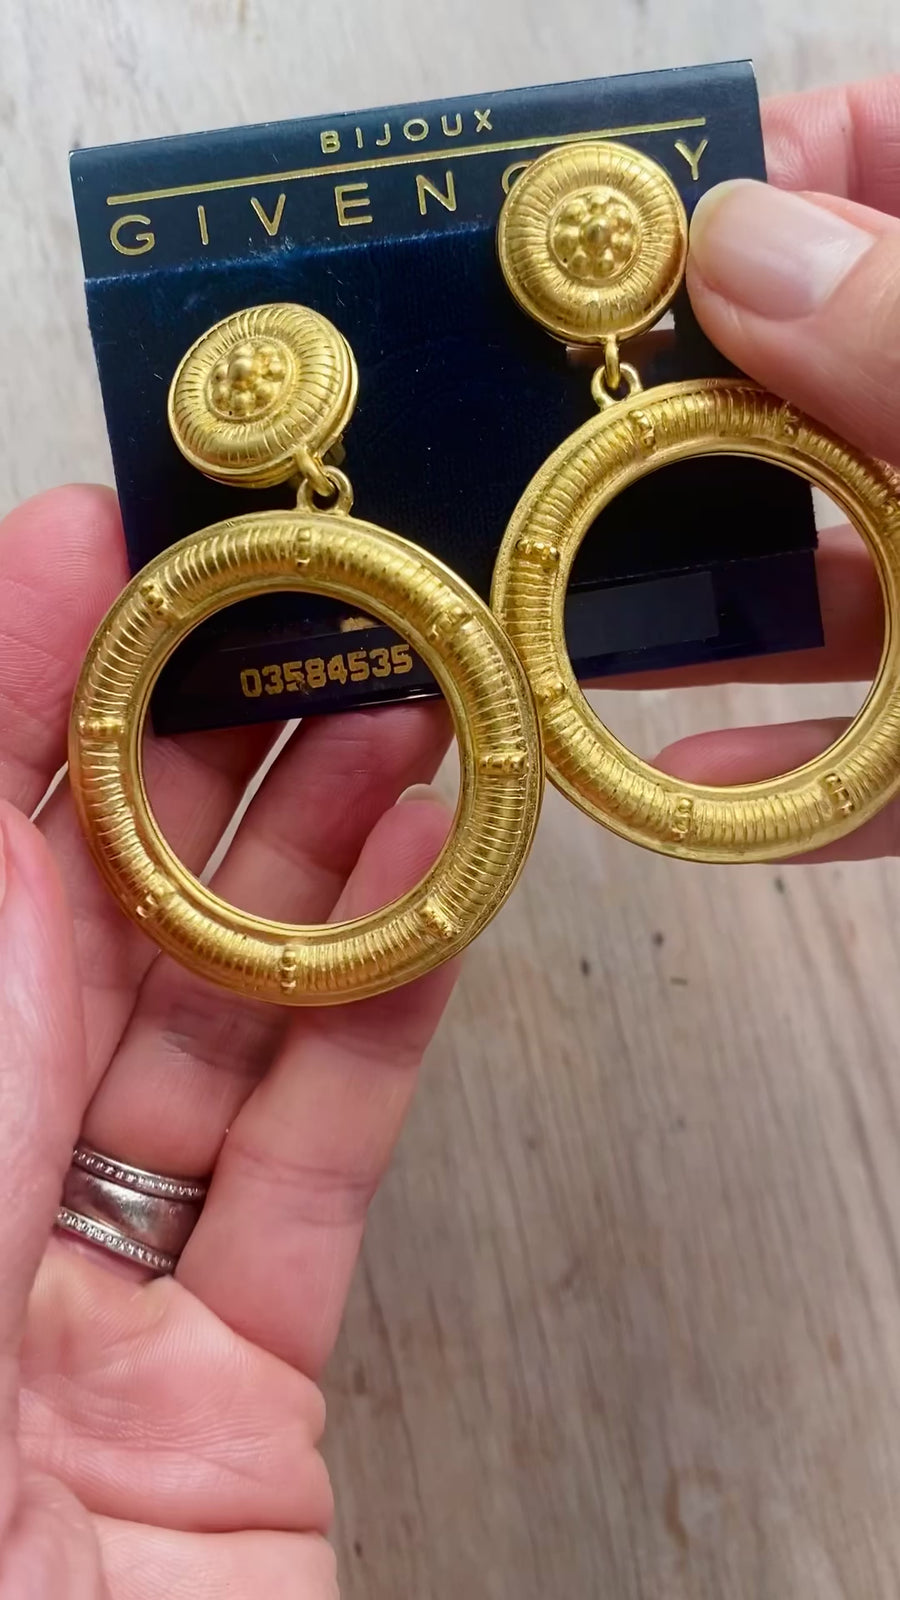 Vintage Givenchy Earrings 1980s - Dynasty era